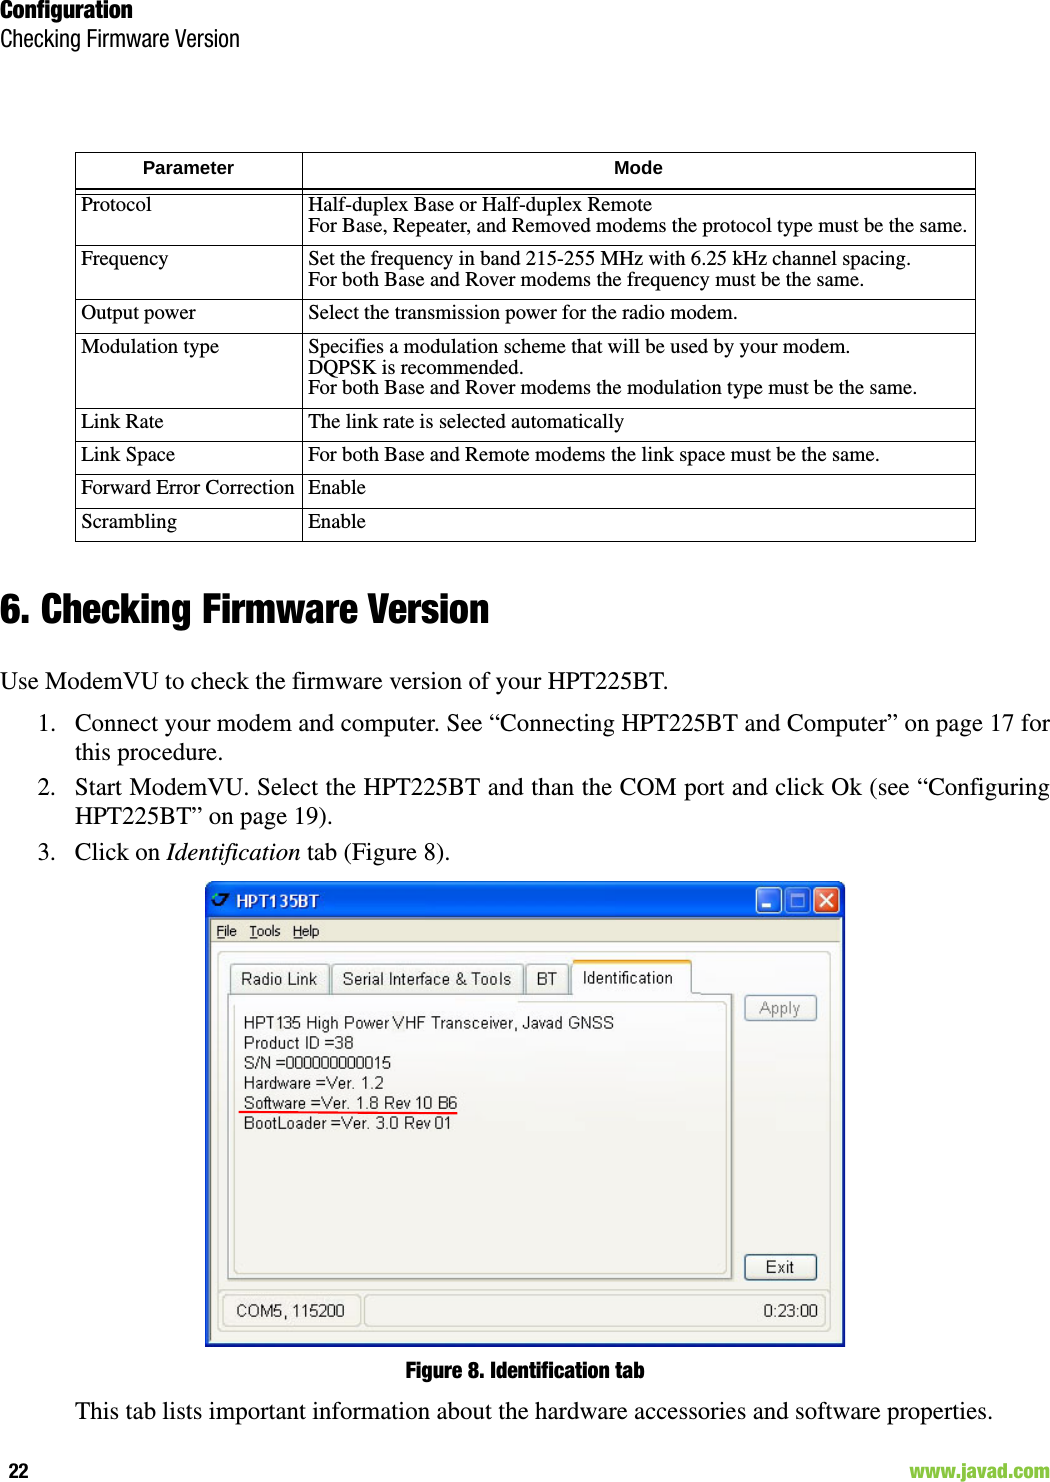 ConfigurationChecking Firmware Version22                                                                                                                     www.javad.com6. Checking Firmware VersionUse ModemVU to check the firmware version of your HPT225BT.1. Connect your modem and computer. See “Connecting HPT225BT and Computer” on page 17 forthis procedure.2. Start ModemVU. Select the HPT225BT and than the COM port and click Ok (see “ConfiguringHPT225BT” on page 19).3. Click on Identification tab (Figure 8).Figure 8. Identification tabThis tab lists important information about the hardware accessories and software properties. Parameter Mode Protocol Half-duplex Base or Half-duplex RemoteFor Base, Repeater, and Removed modems the protocol type must be the same.Frequency Set the frequency in band 215-255 MHz with 6.25 kHz channel spacing.For both Base and Rover modems the frequency must be the same.Output power Select the transmission power for the radio modem.Modulation type Specifies a modulation scheme that will be used by your modem. DQPSK is recommended.For both Base and Rover modems the modulation type must be the same.Link Rate The link rate is selected automaticallyLink Space For both Base and Remote modems the link space must be the same.Forward Error Correction EnableScrambling Enable